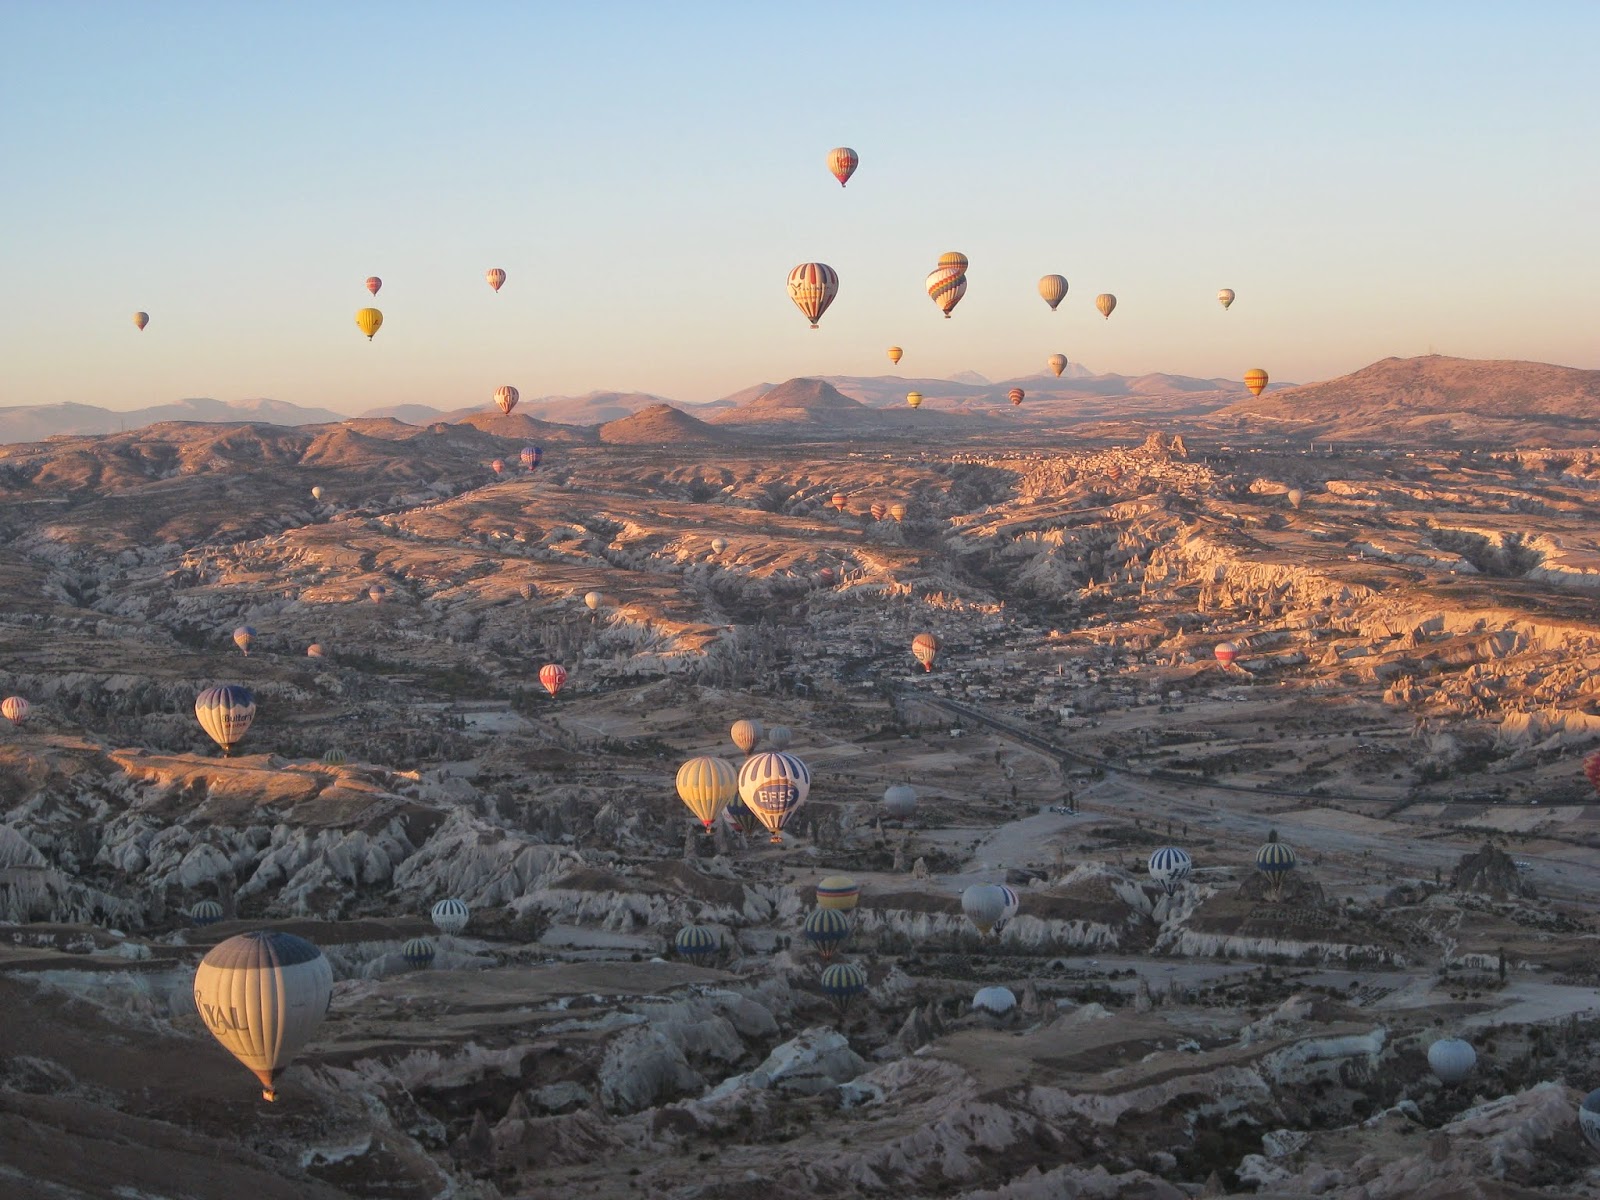 Cappadocia - It's fun to look at other hot air balloons and the scenery